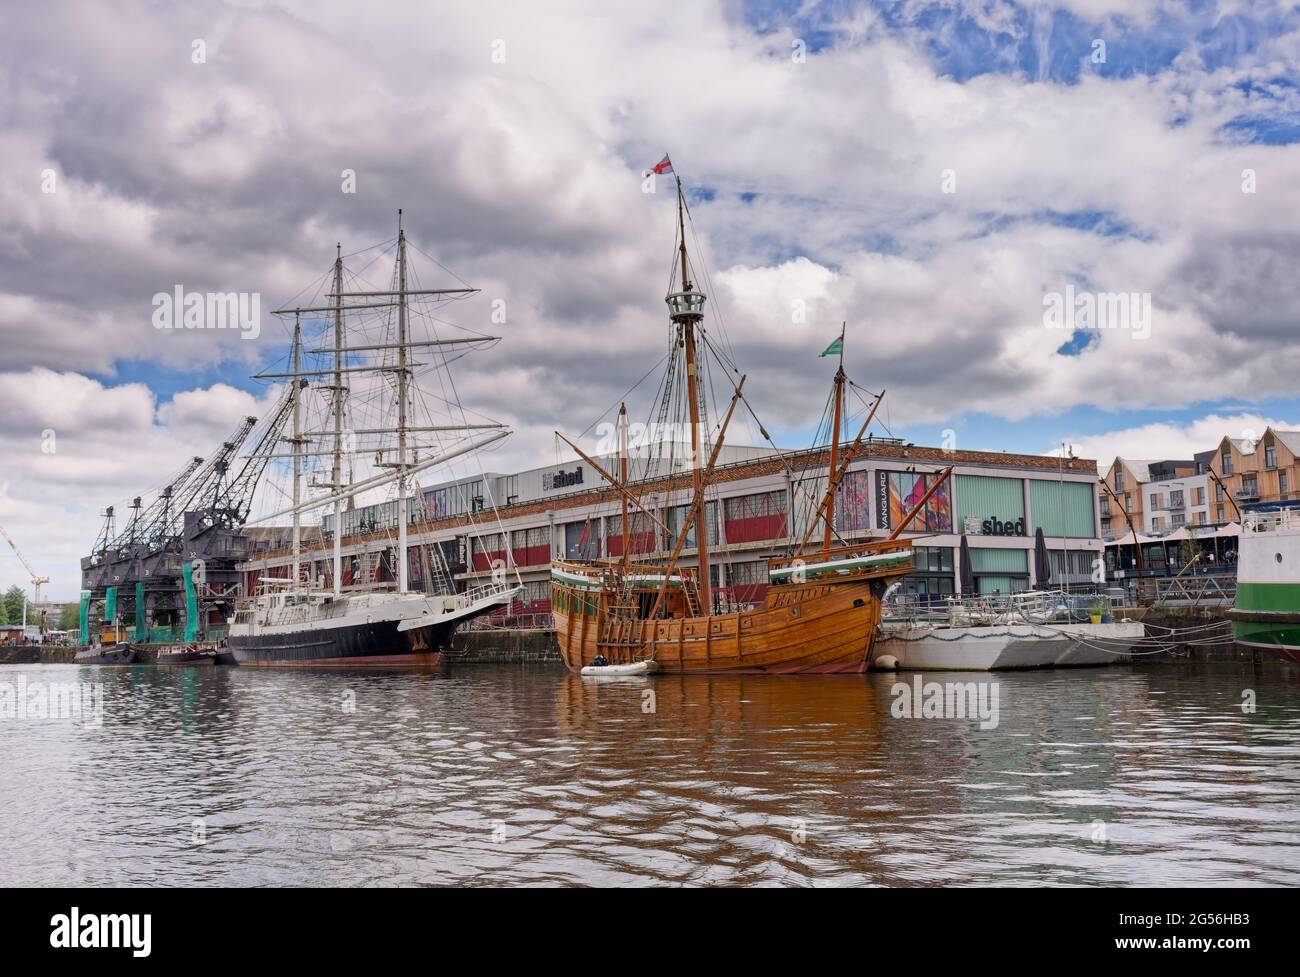 The 'Matthew', a replica square rigged sailing ship moored on the River Avon in Bristol. Built in 1994 Stock Photo